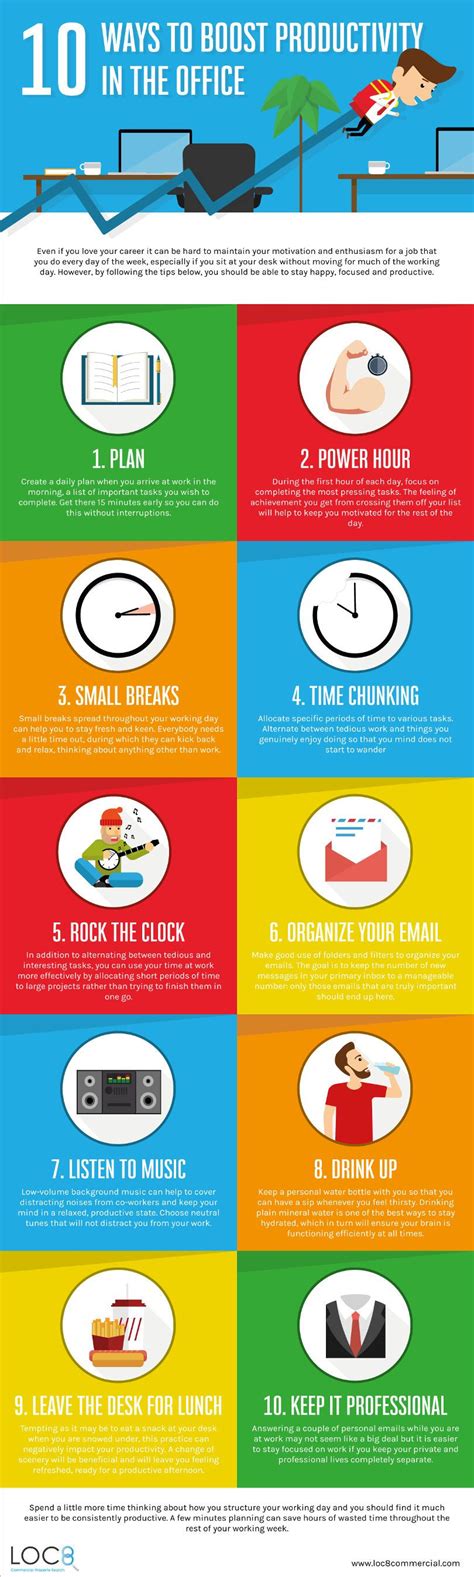 Boost Productivity In The Office Infographic From Loc8 Commerical 10